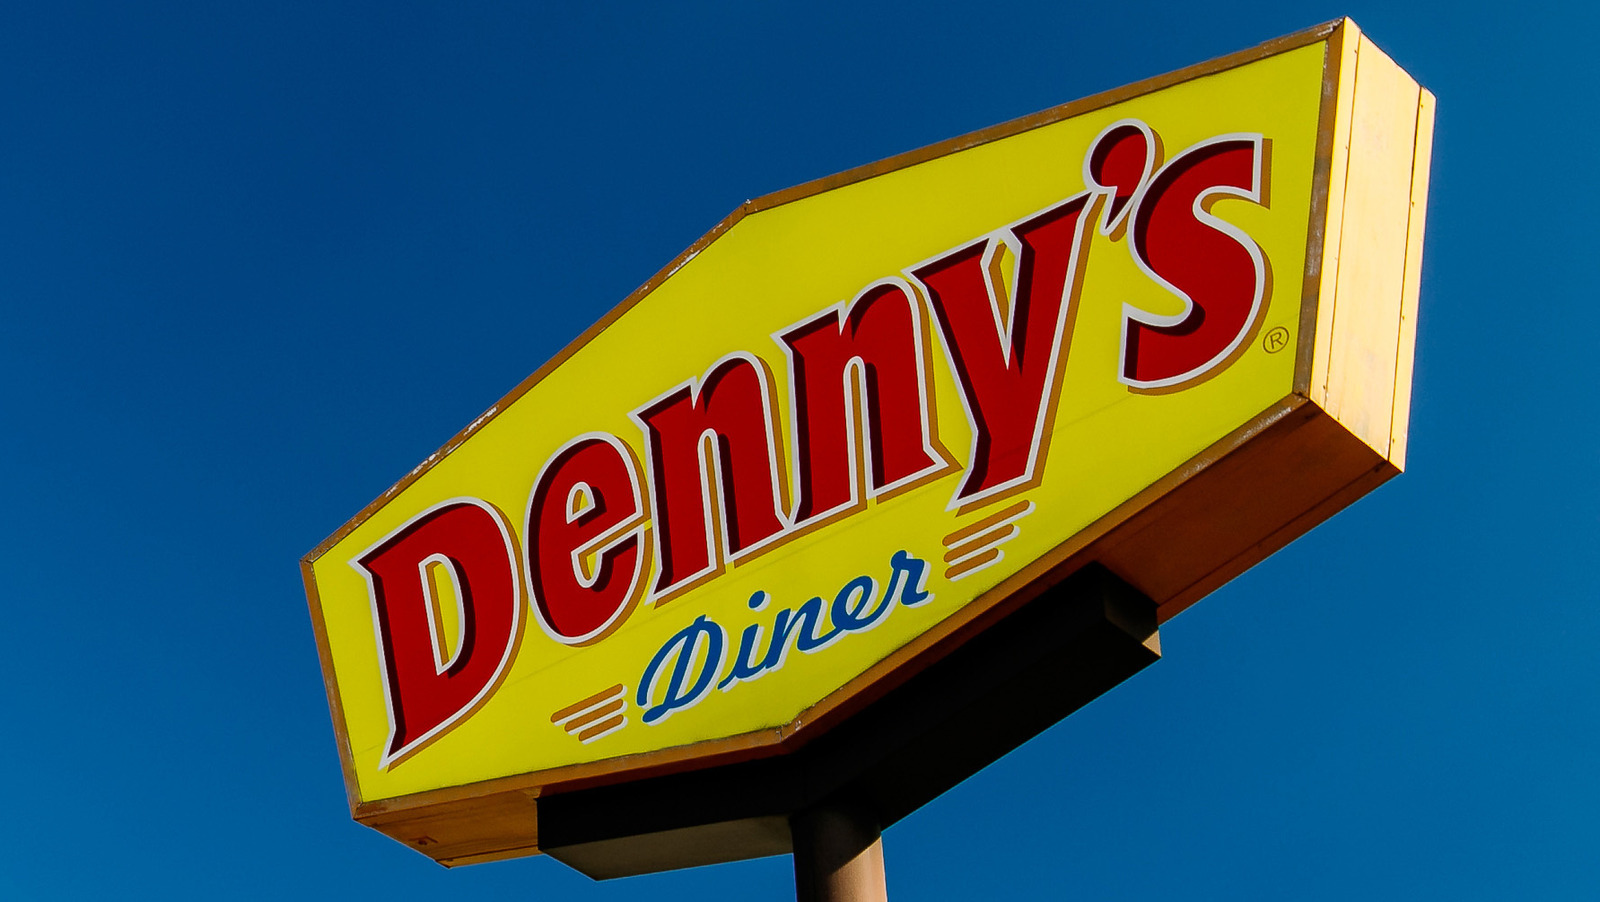 You won't believe what Denny's was originally called